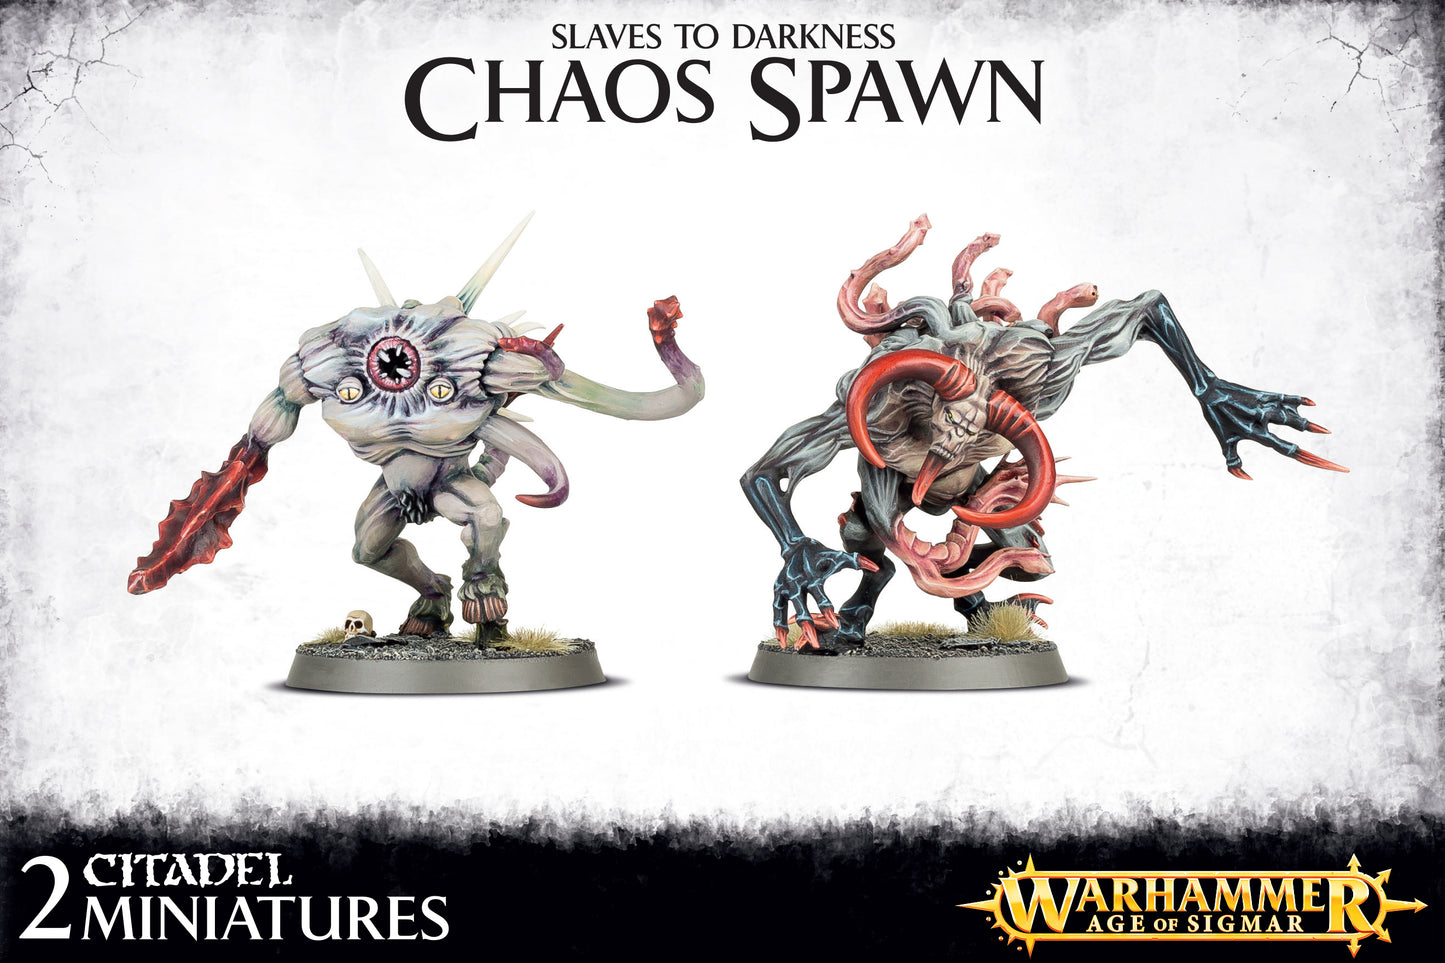 Slaves to Darkness: Chaos Spawn box art